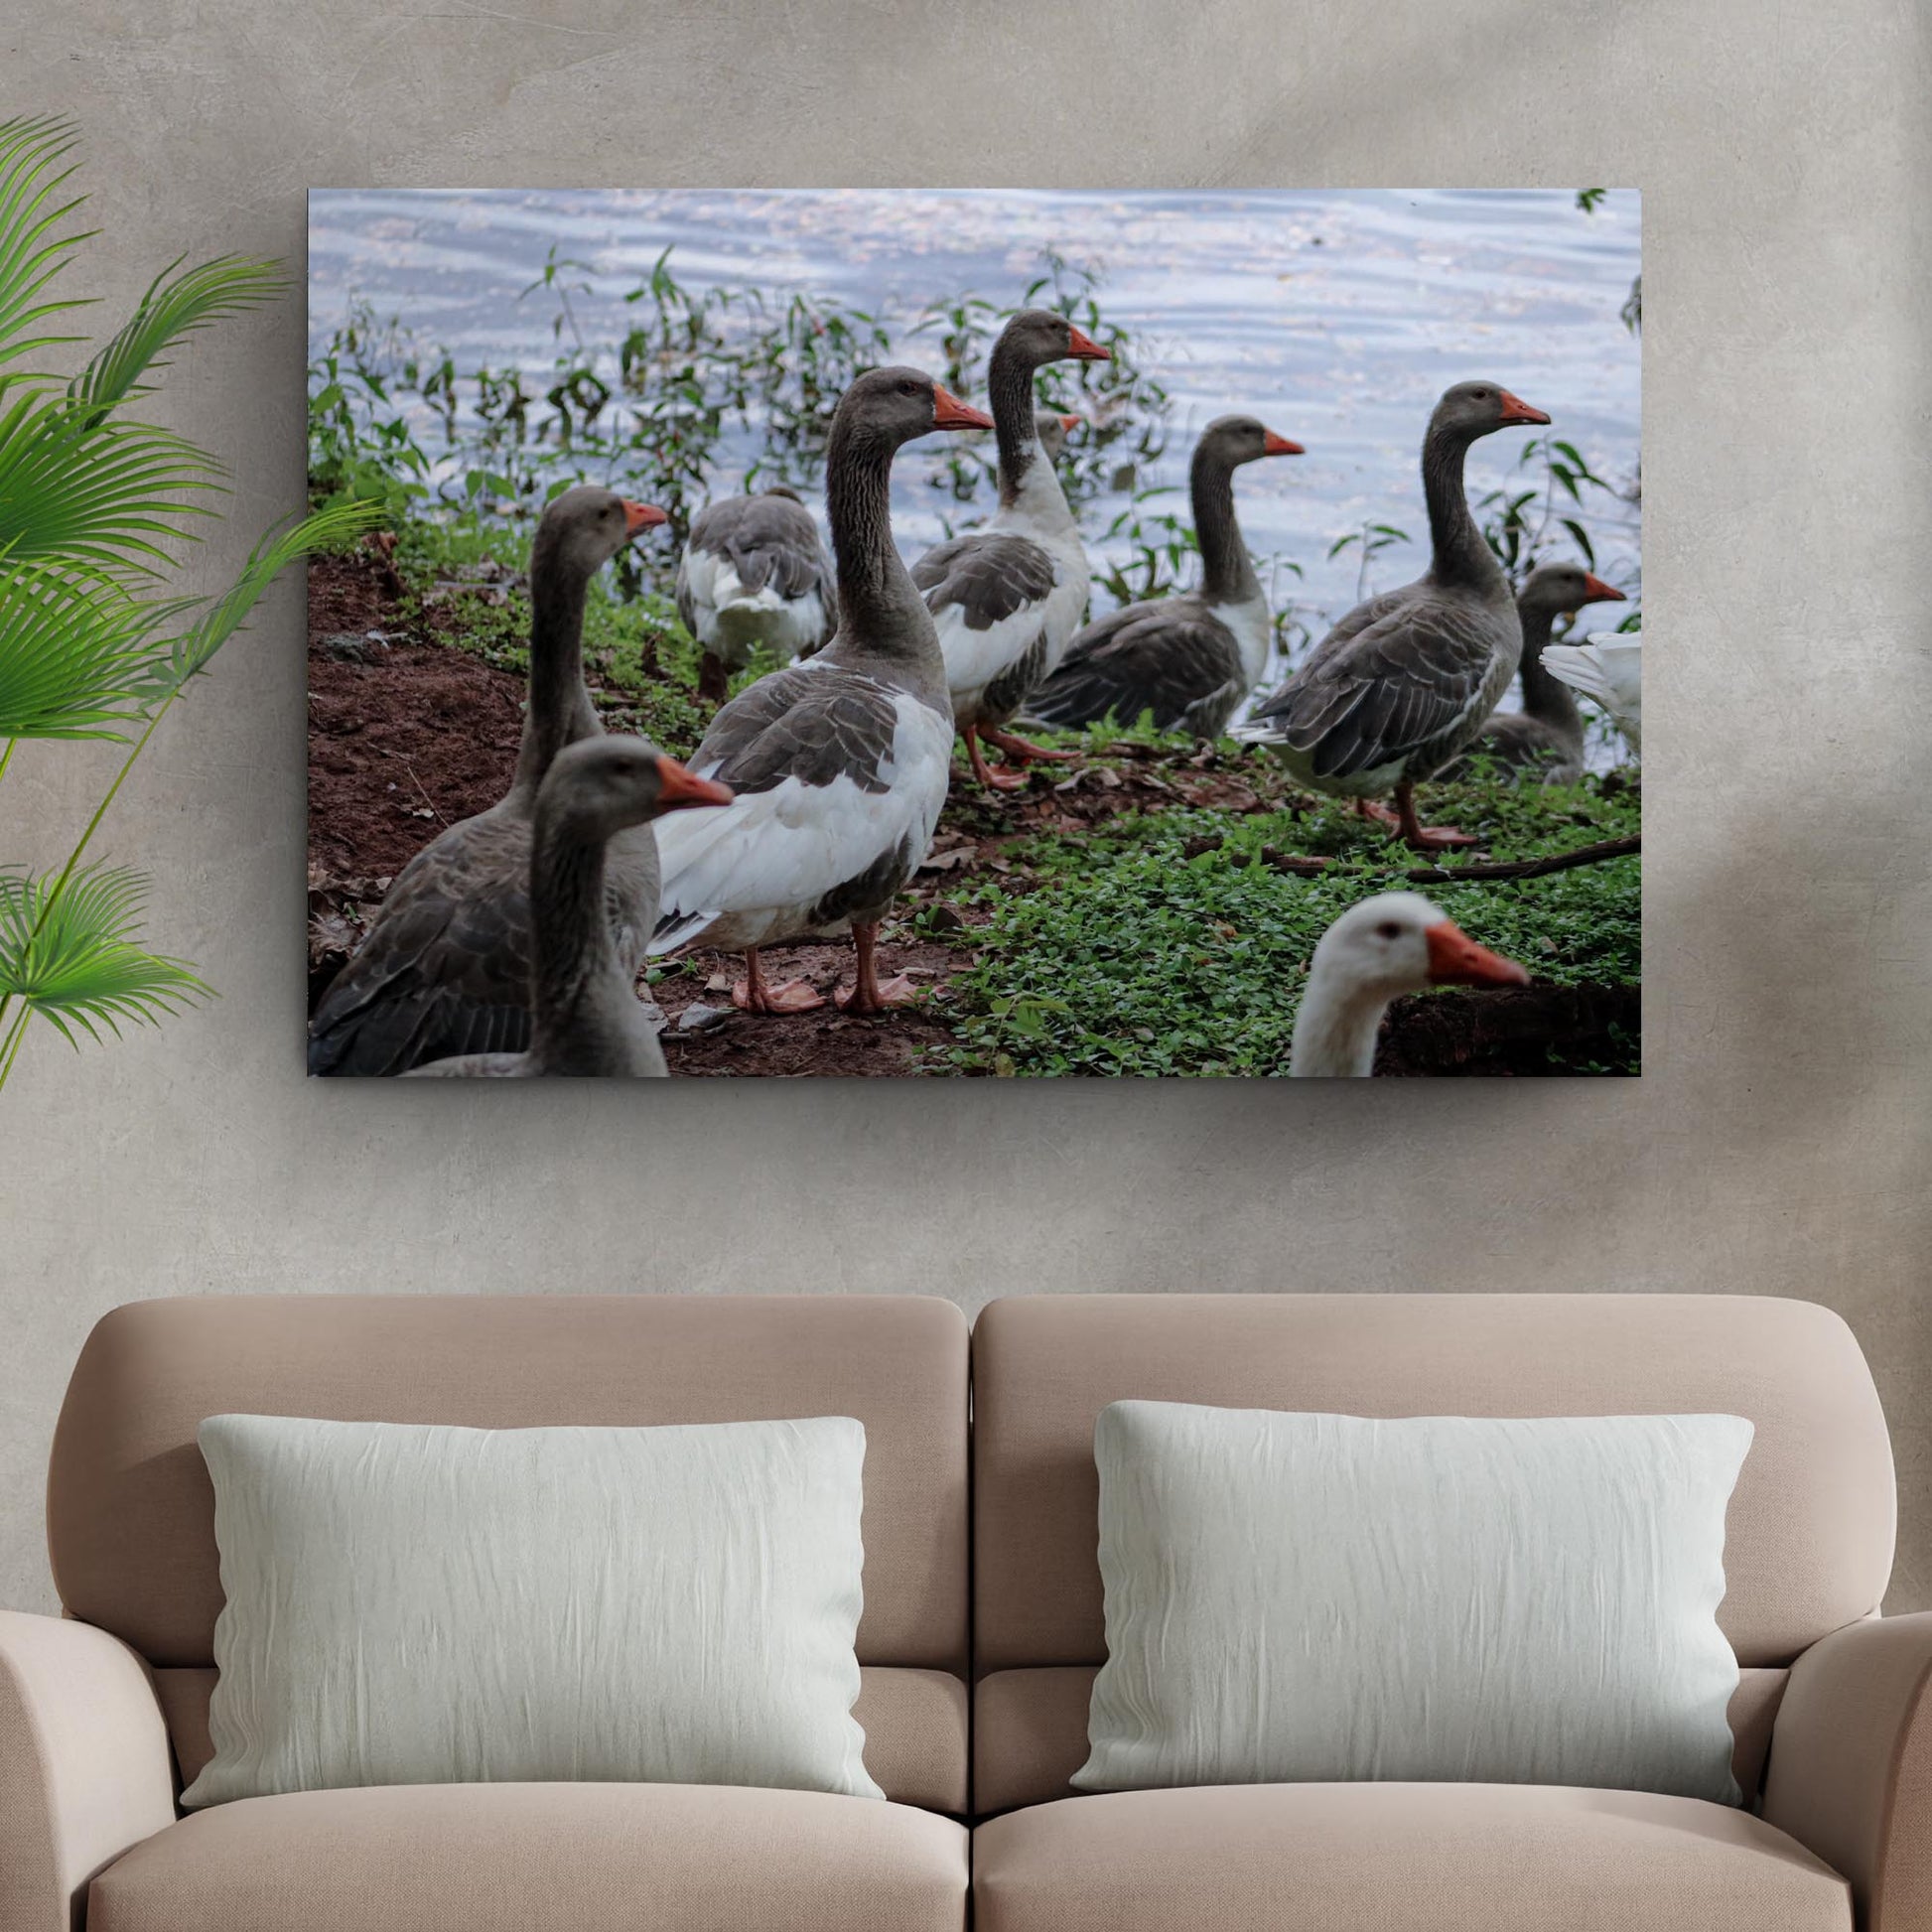 Flock Of Domestic Geese Canvas Wall Art - Image by Tailored Canvases